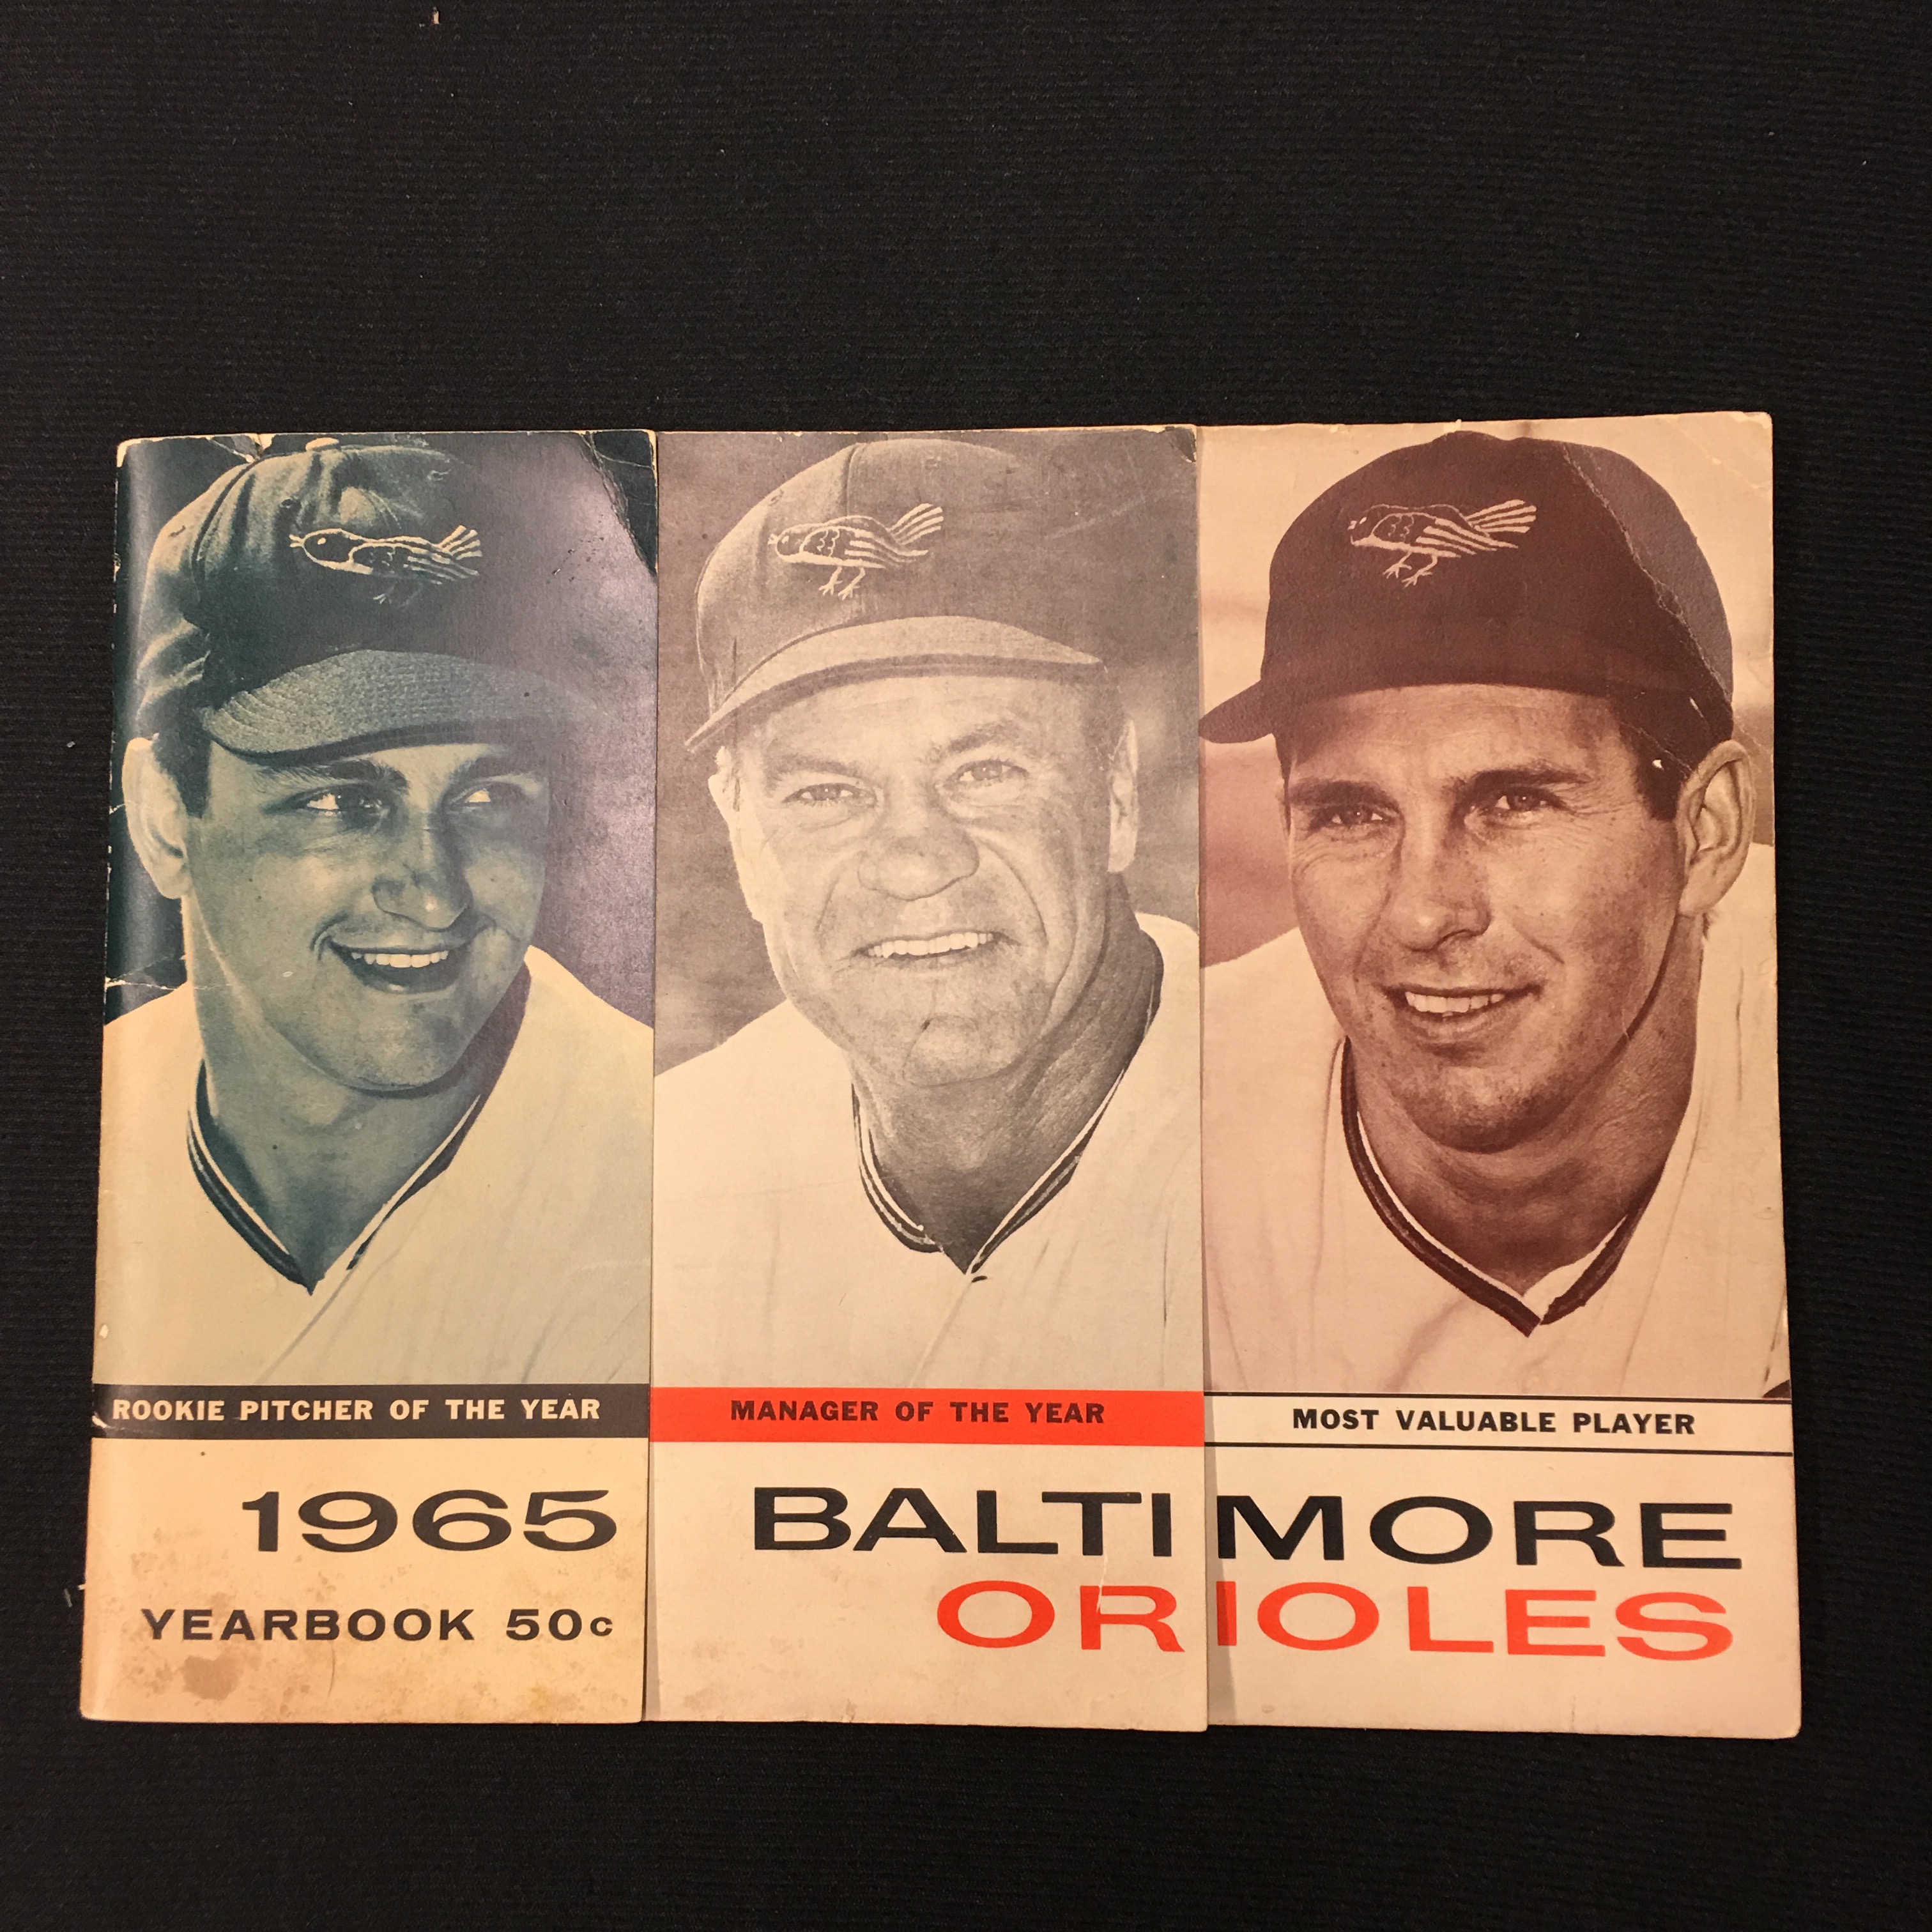 1965 Baltimore Orioles yearbook